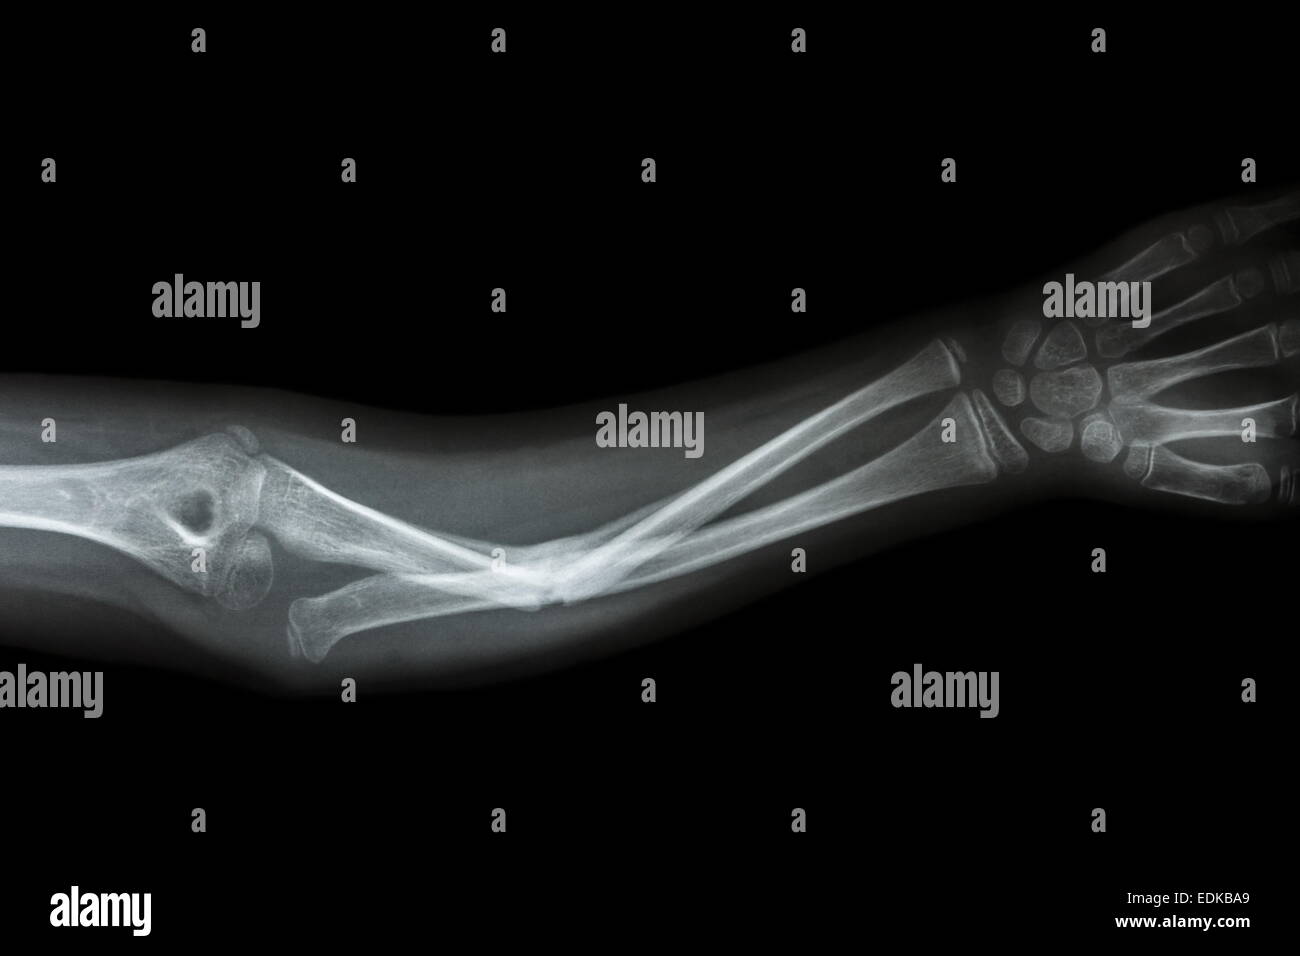 film x-ray forearm AP : show fracture shaft of ulnar(forearm's bone) Stock Photo